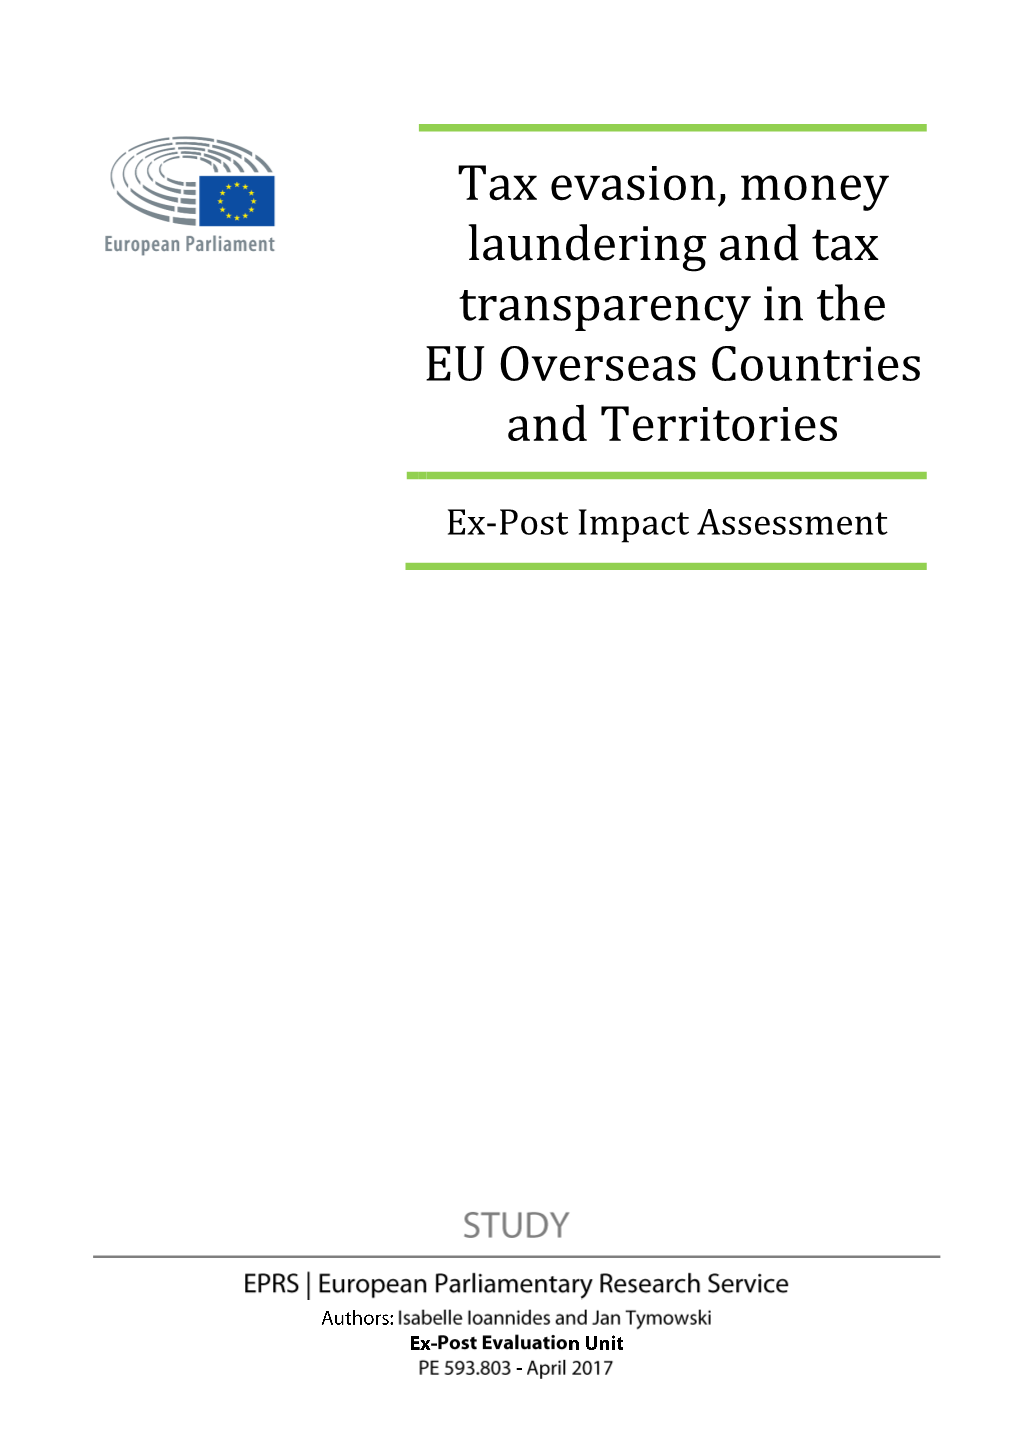 Tax Evasion, Money Laundering and Tax Transparency in the EU Overseas Countries and Territories